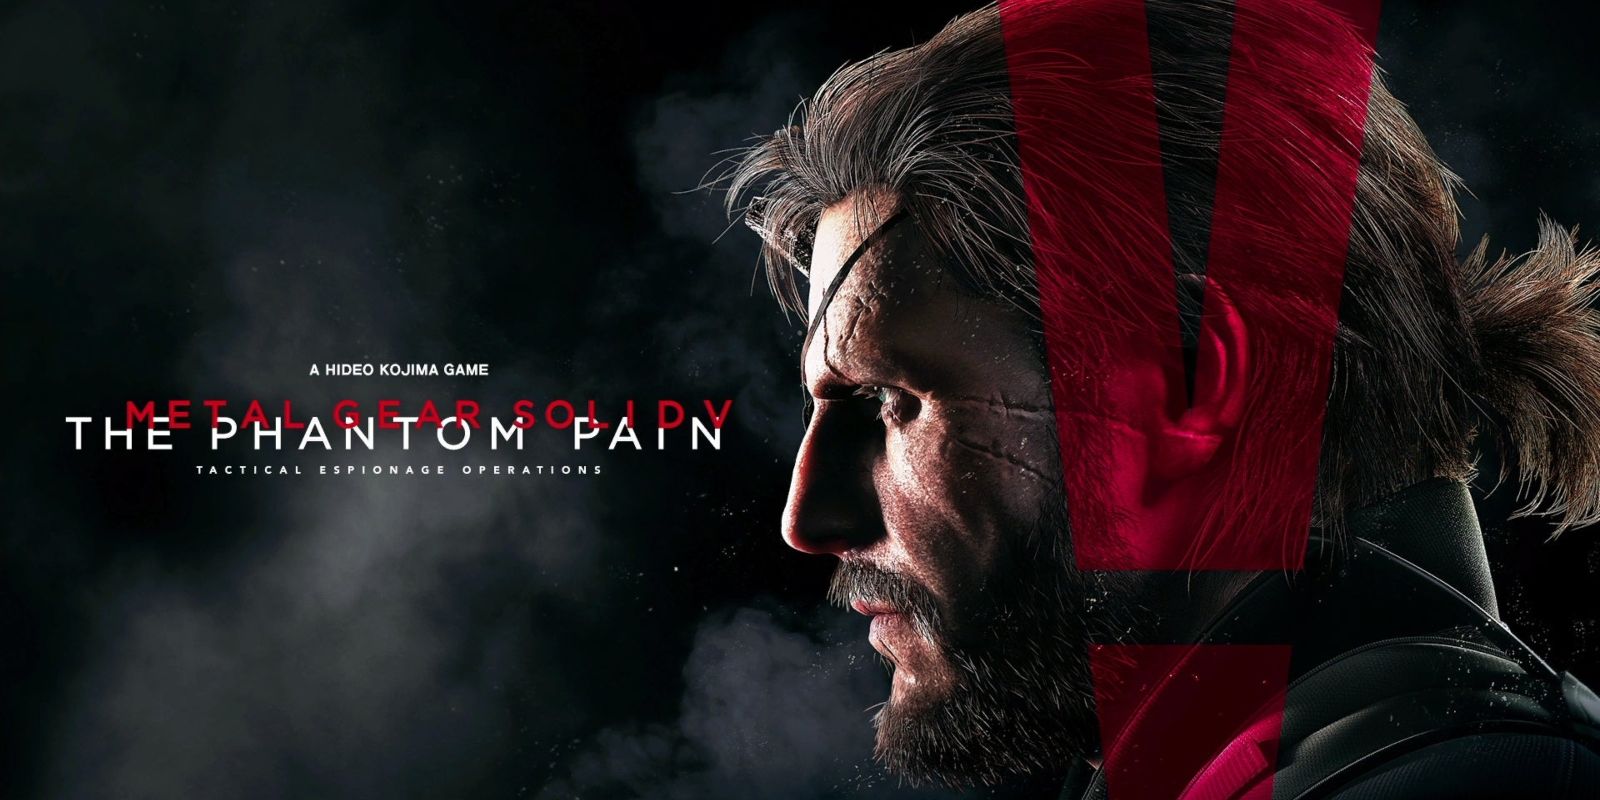 A promotional poster for the game, featuring Big Boss